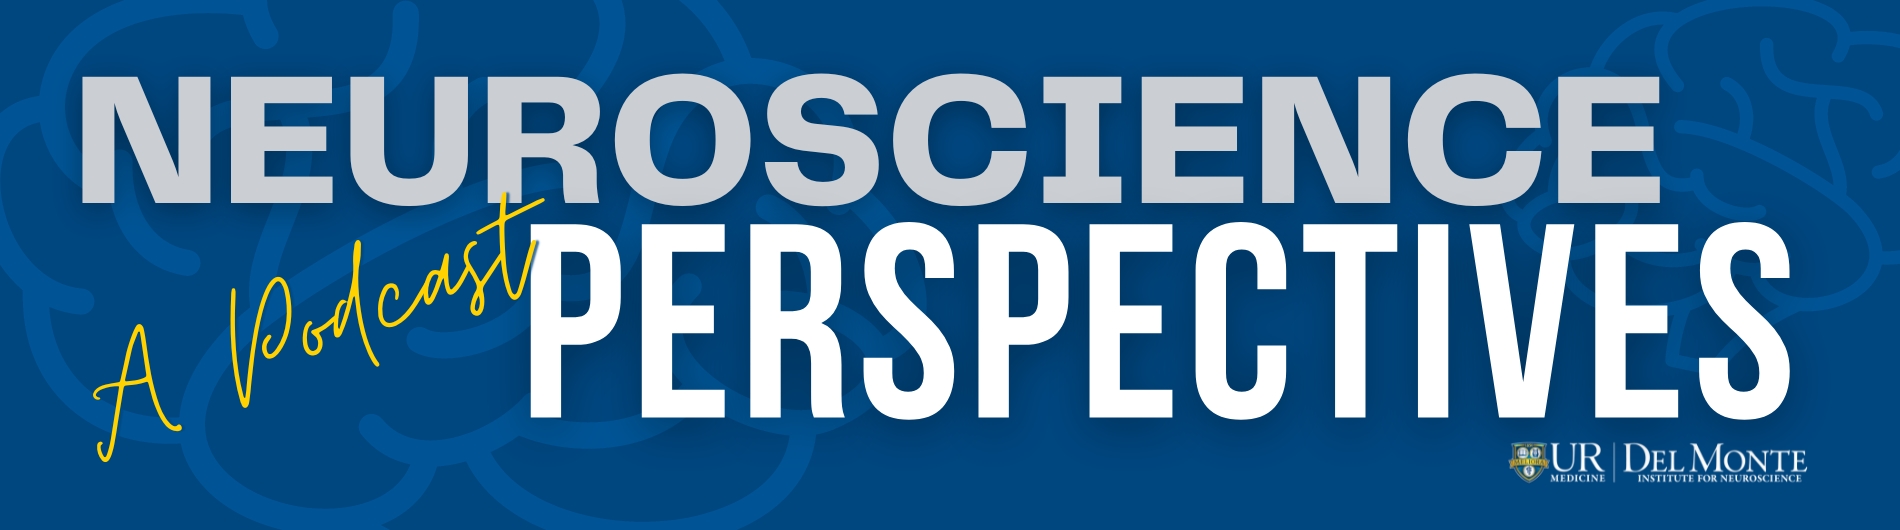 Neuroscience perspectives banner image